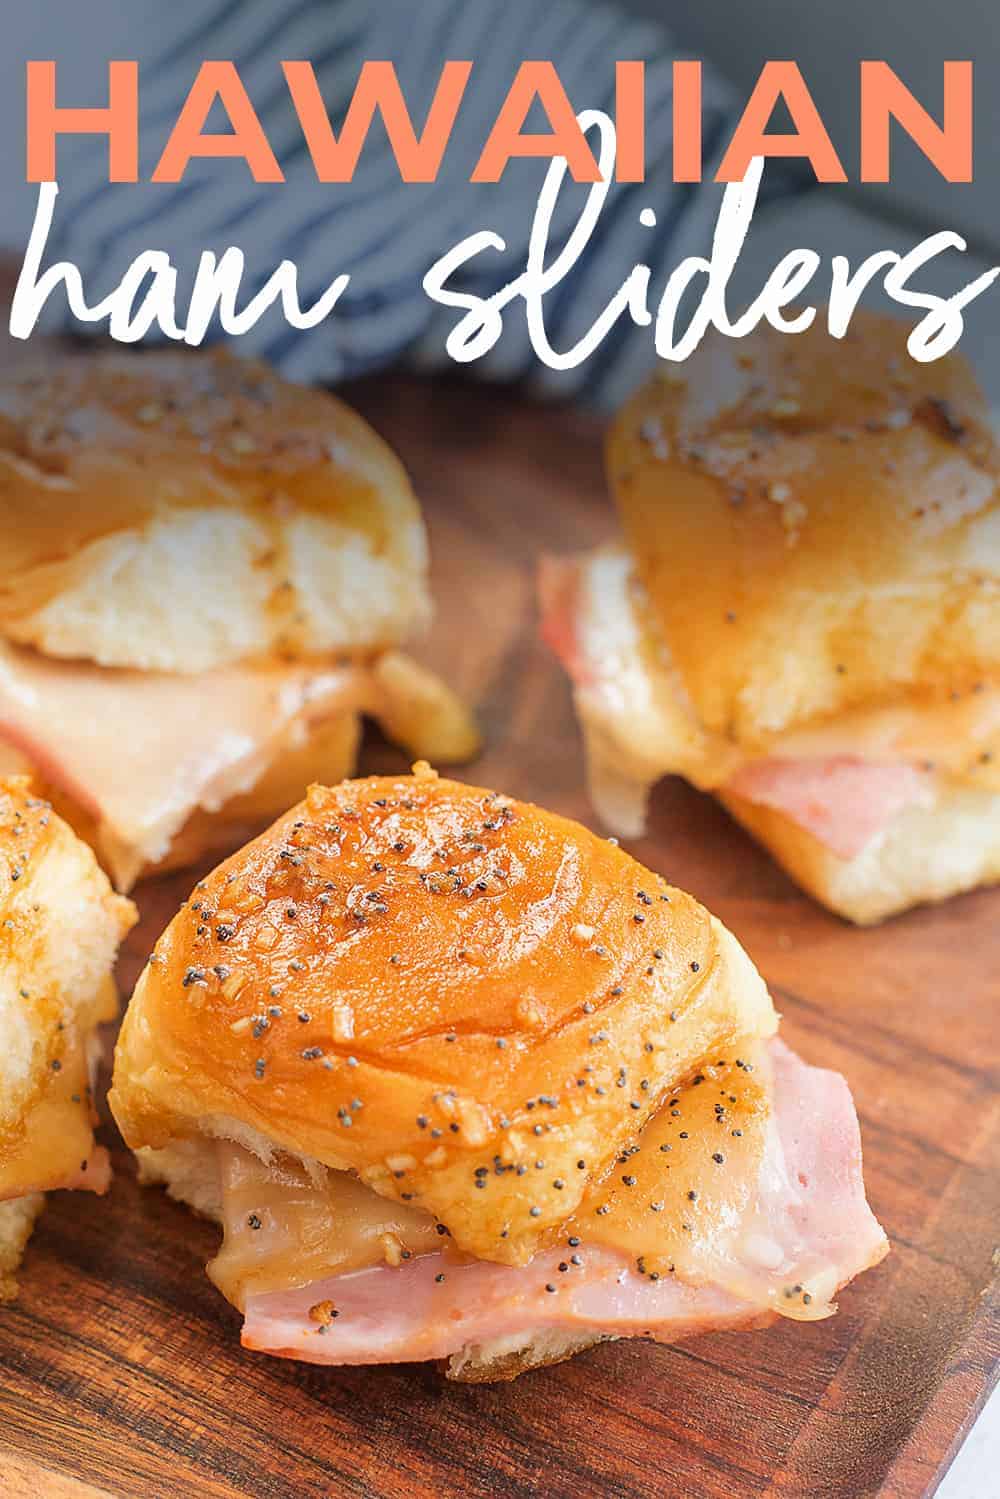 hot ham and chees sliders on wooden cutting board.